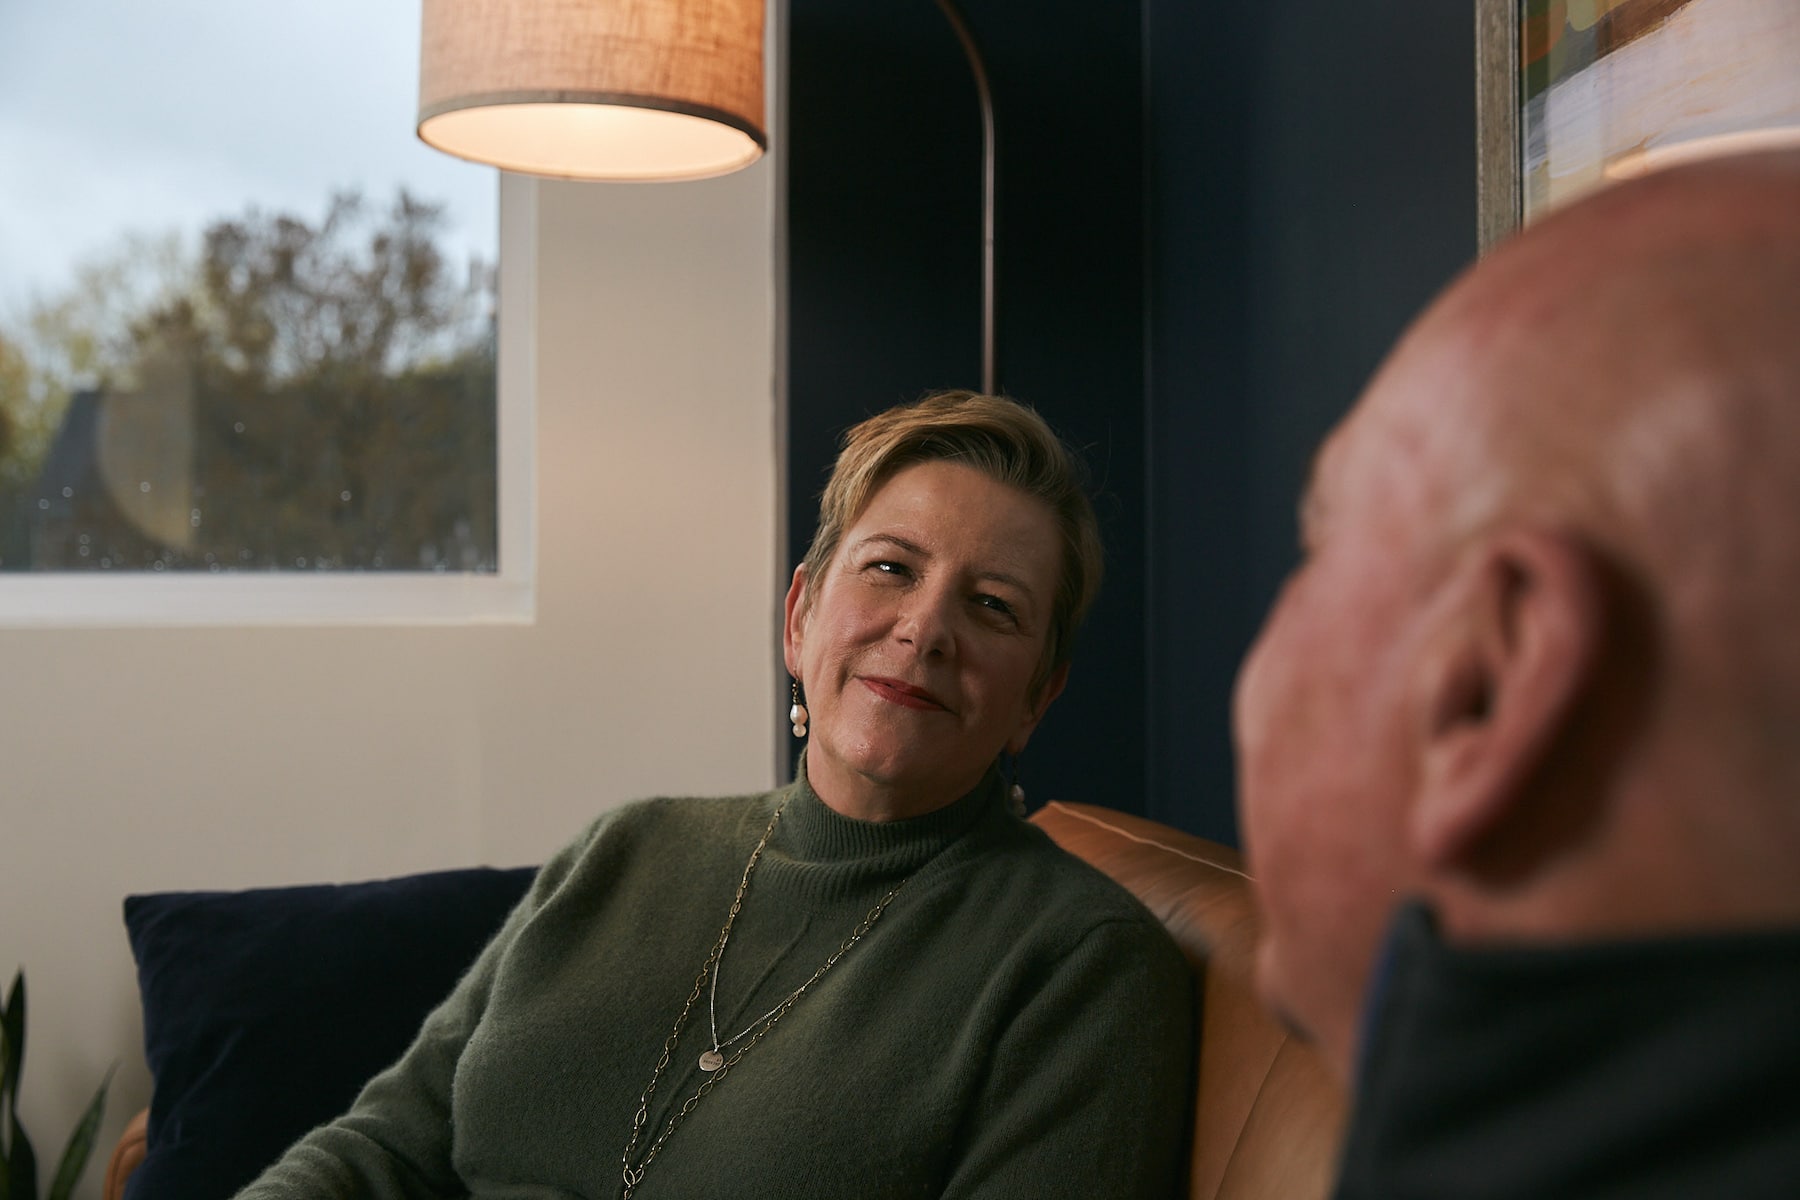 woman smiling at man in therapy session